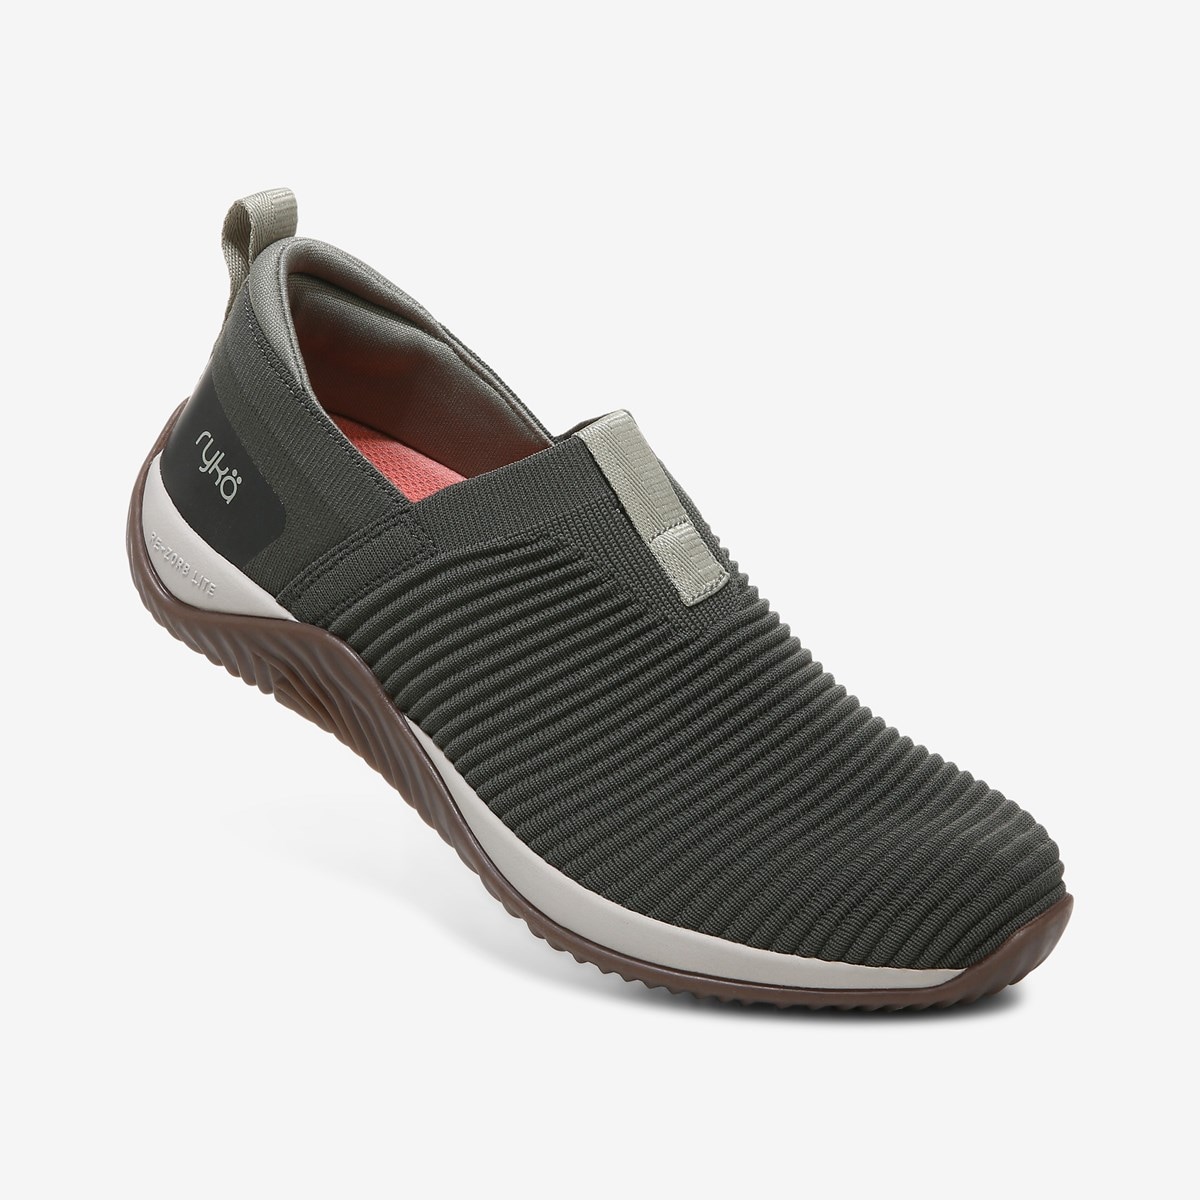 Echo Knit Slip On Sneaker | Women's Casual Shoes | Rykä - Made for 